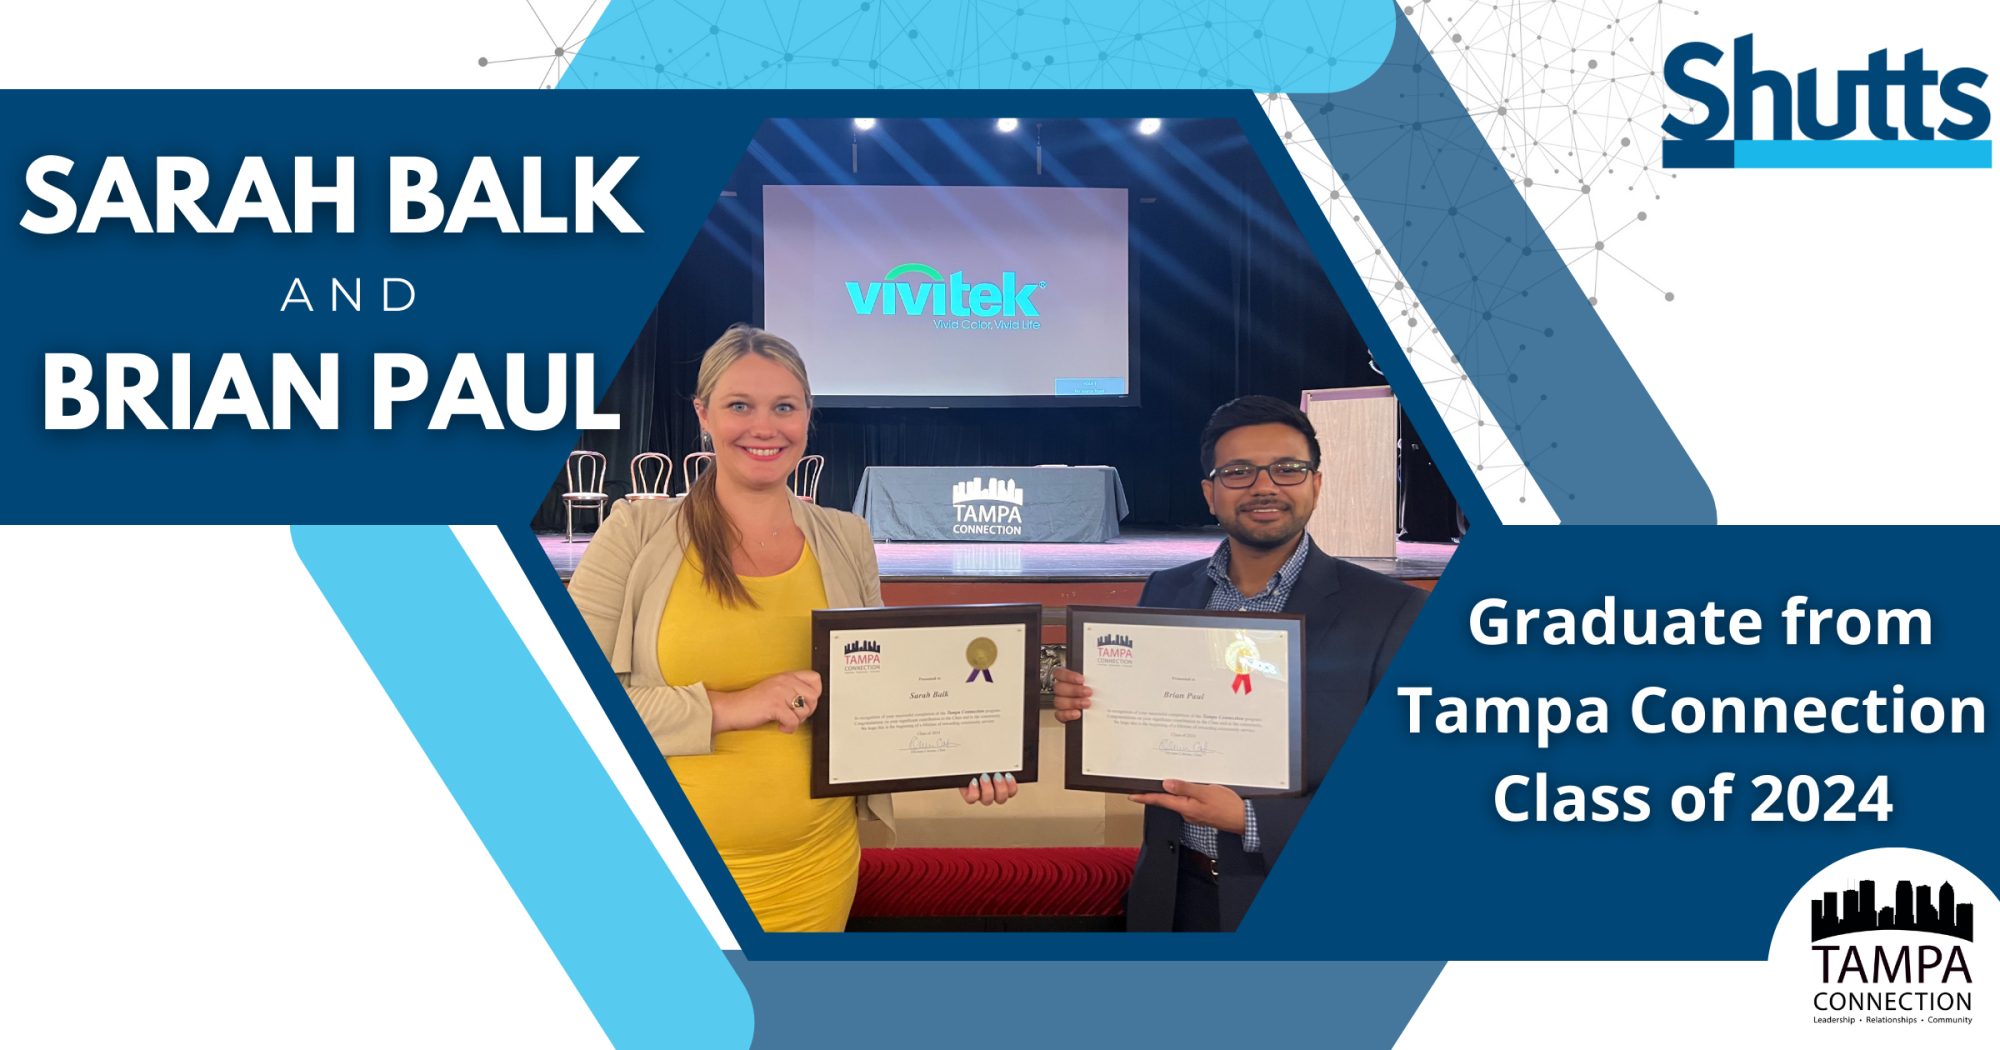 Sarah Balk and Brian Paul Graduate from Tampa Connection Class of 2024